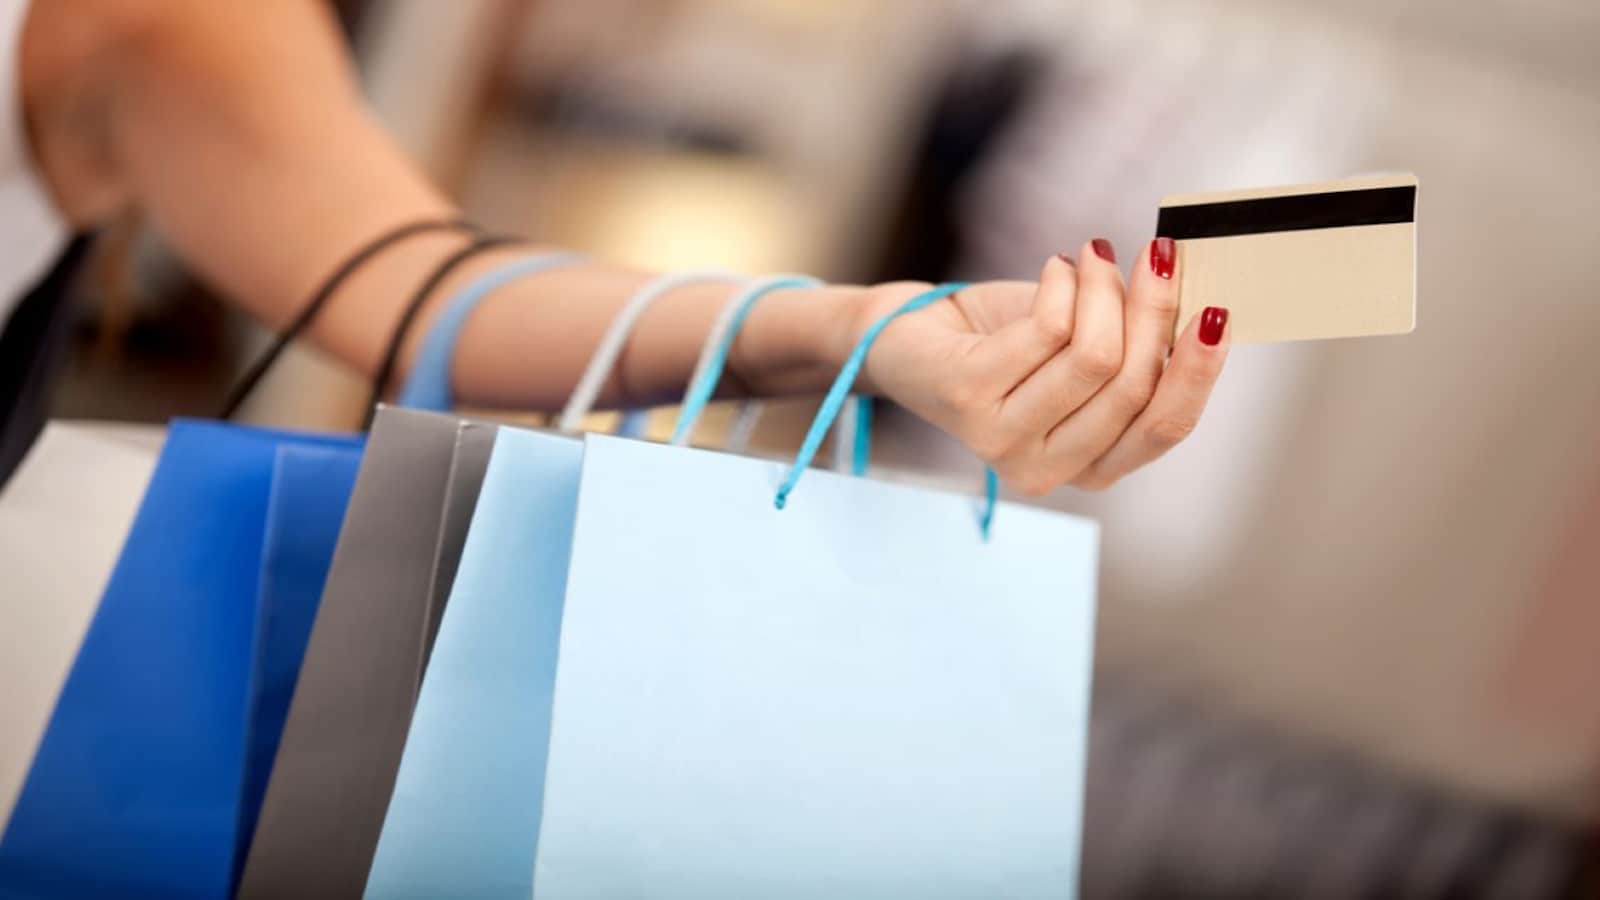 7 easy steps to control over-spending